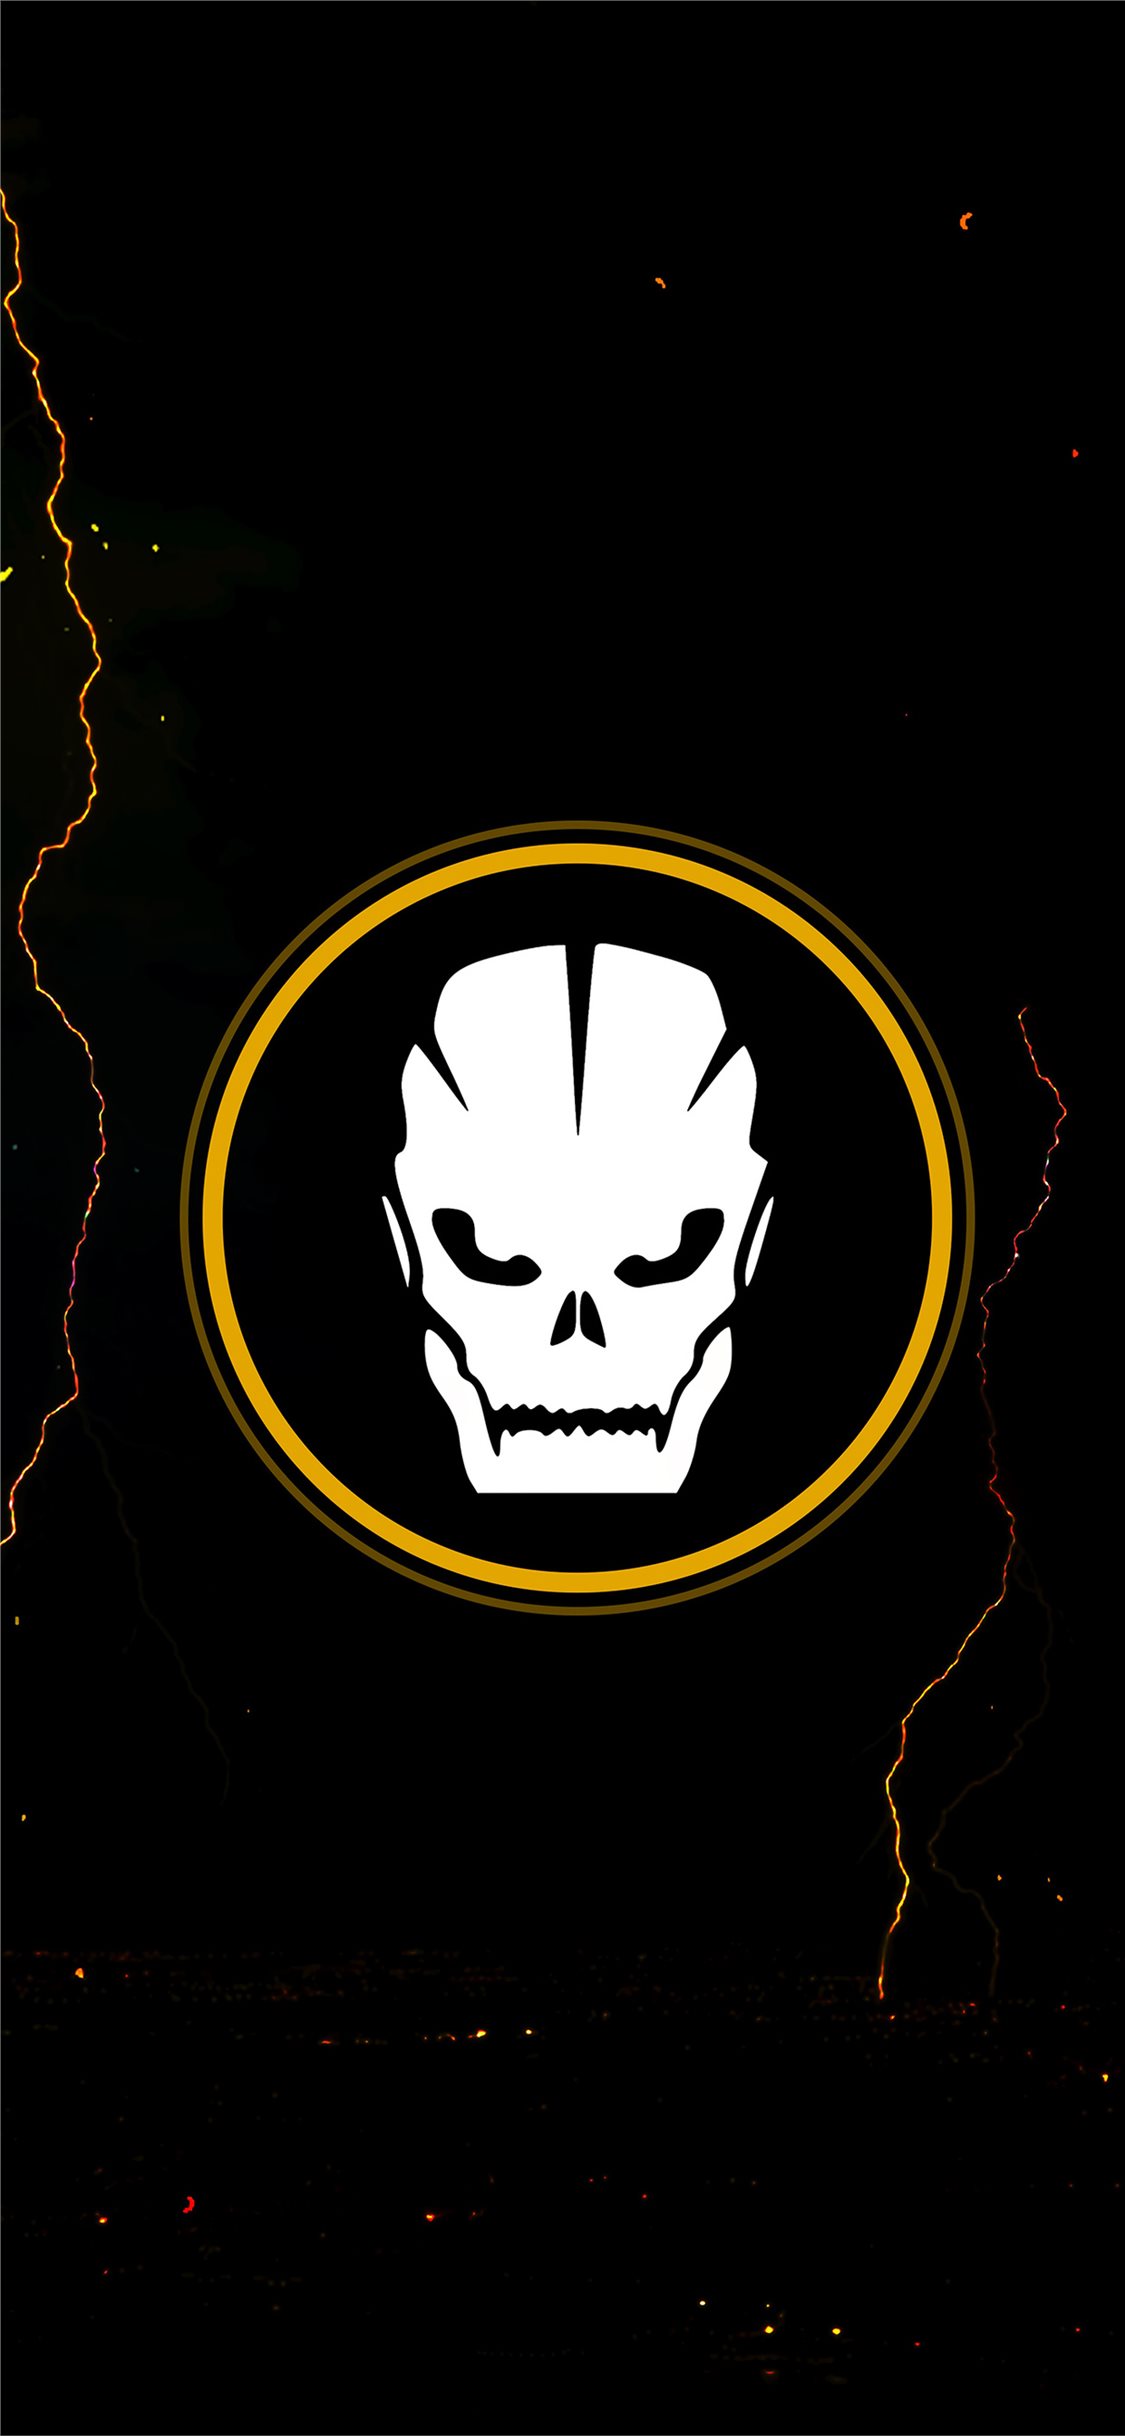 Call Of Duty Black Ops 4 Background